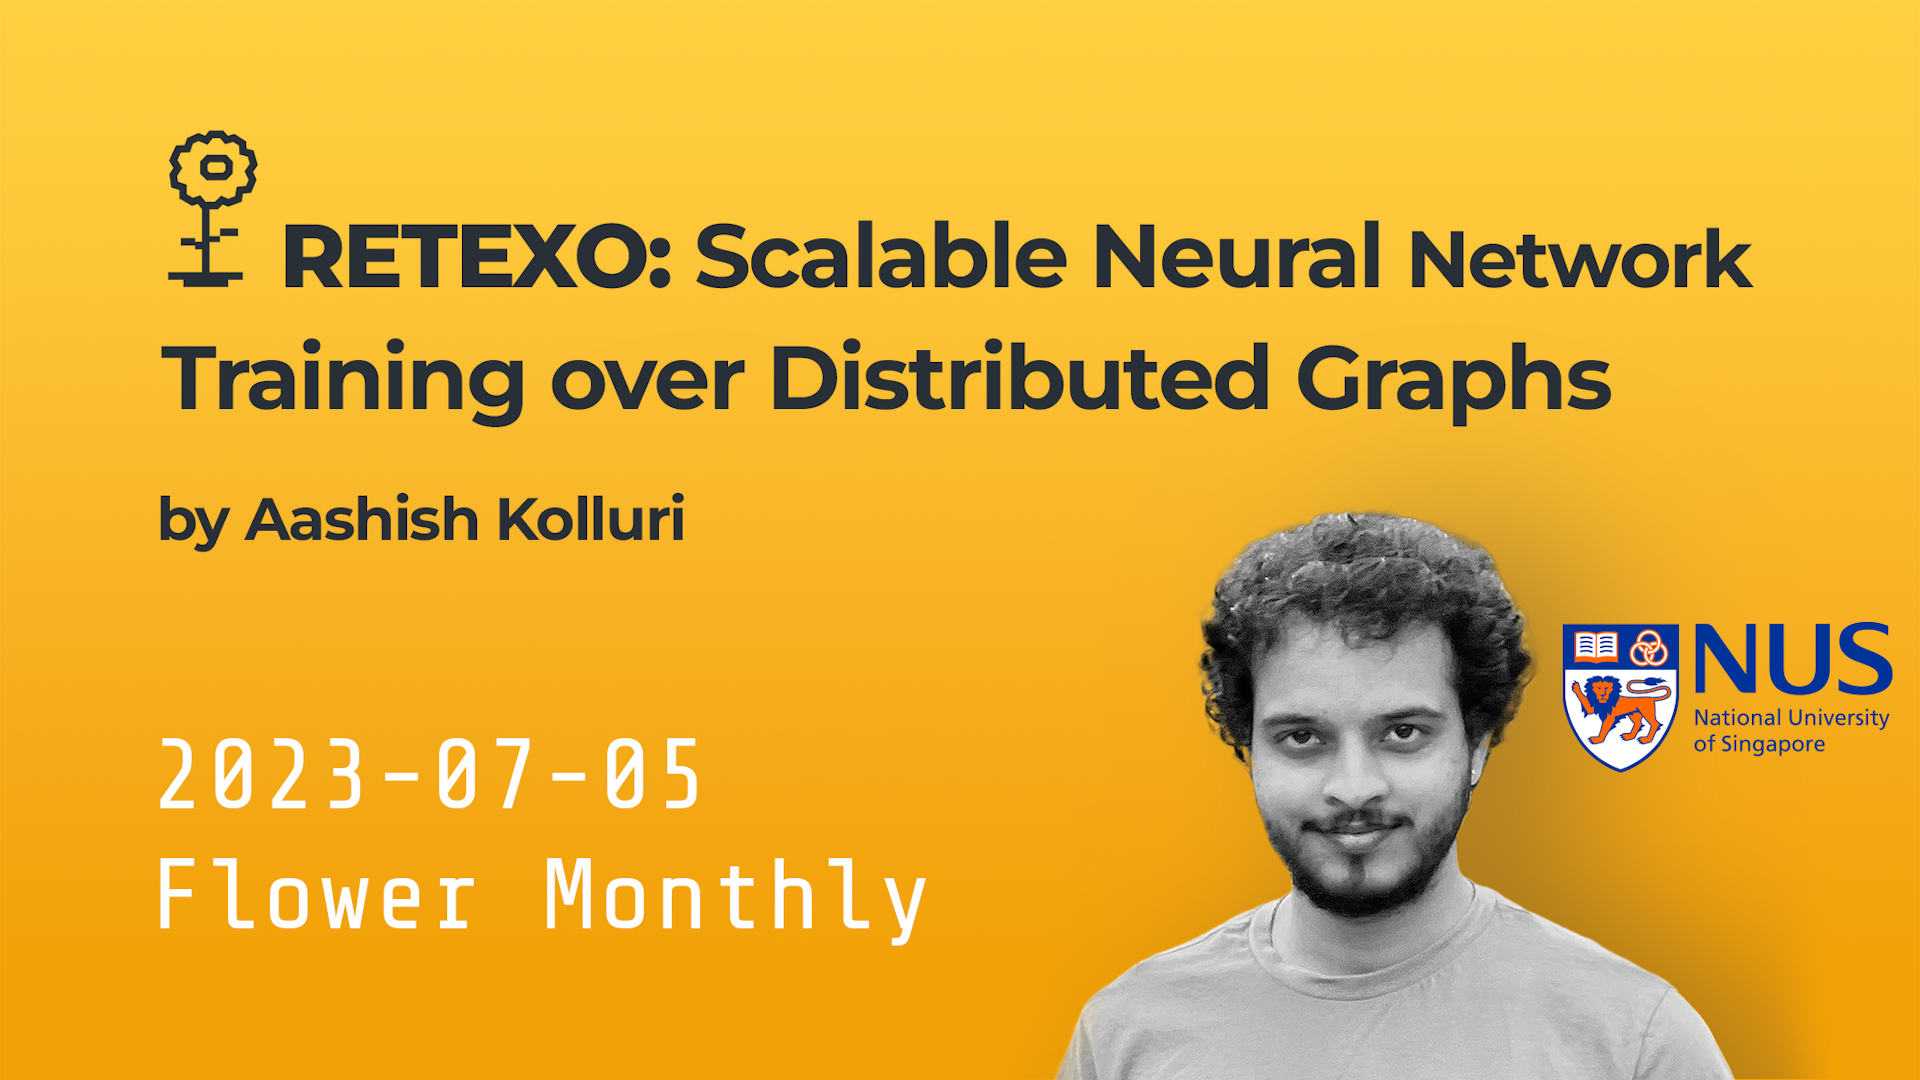 RETEXO: Scalable Neural Network Training over Distributed Graphs